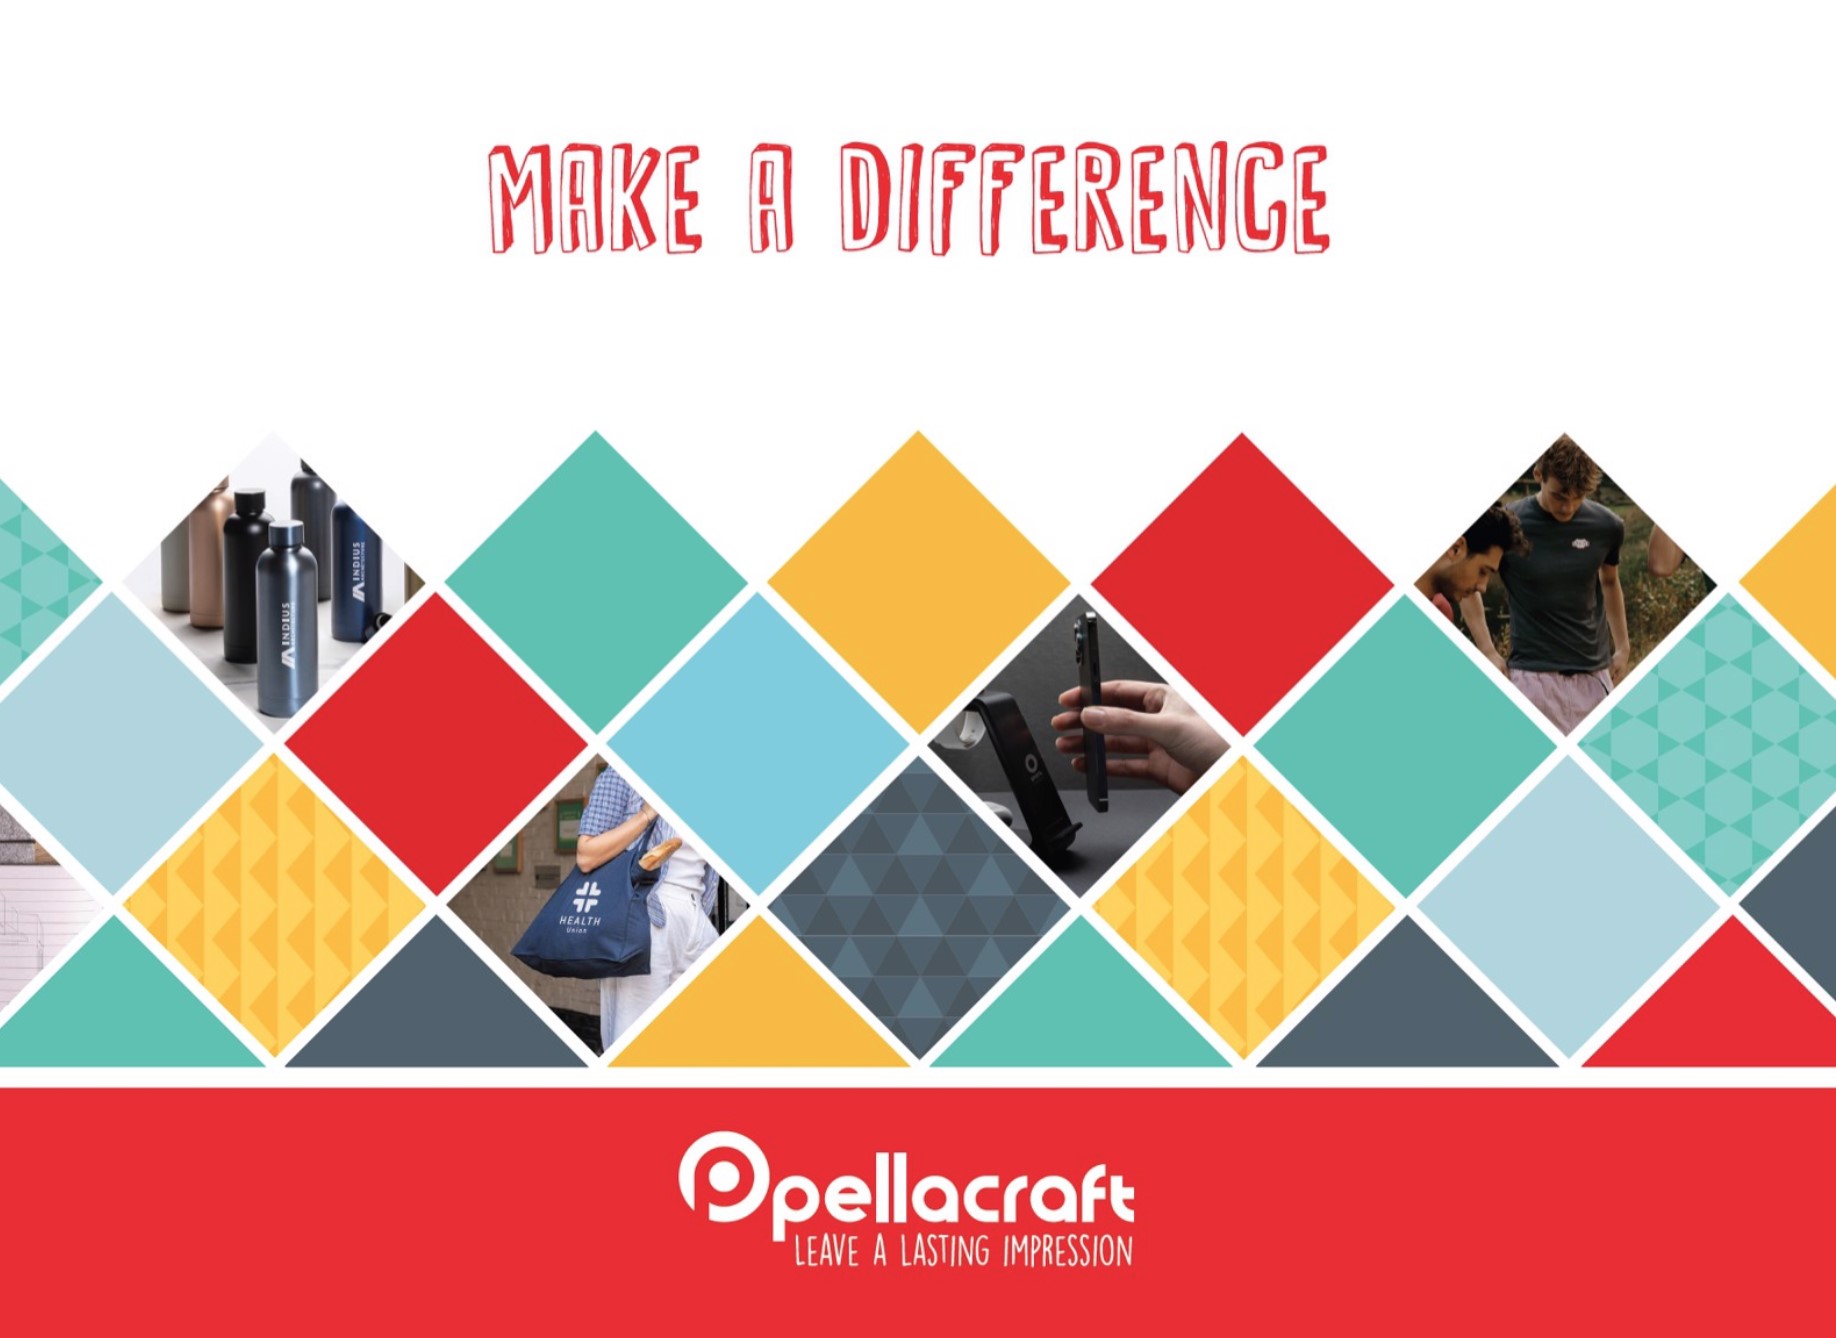 pellacraft_make_a_difference_online_pdf